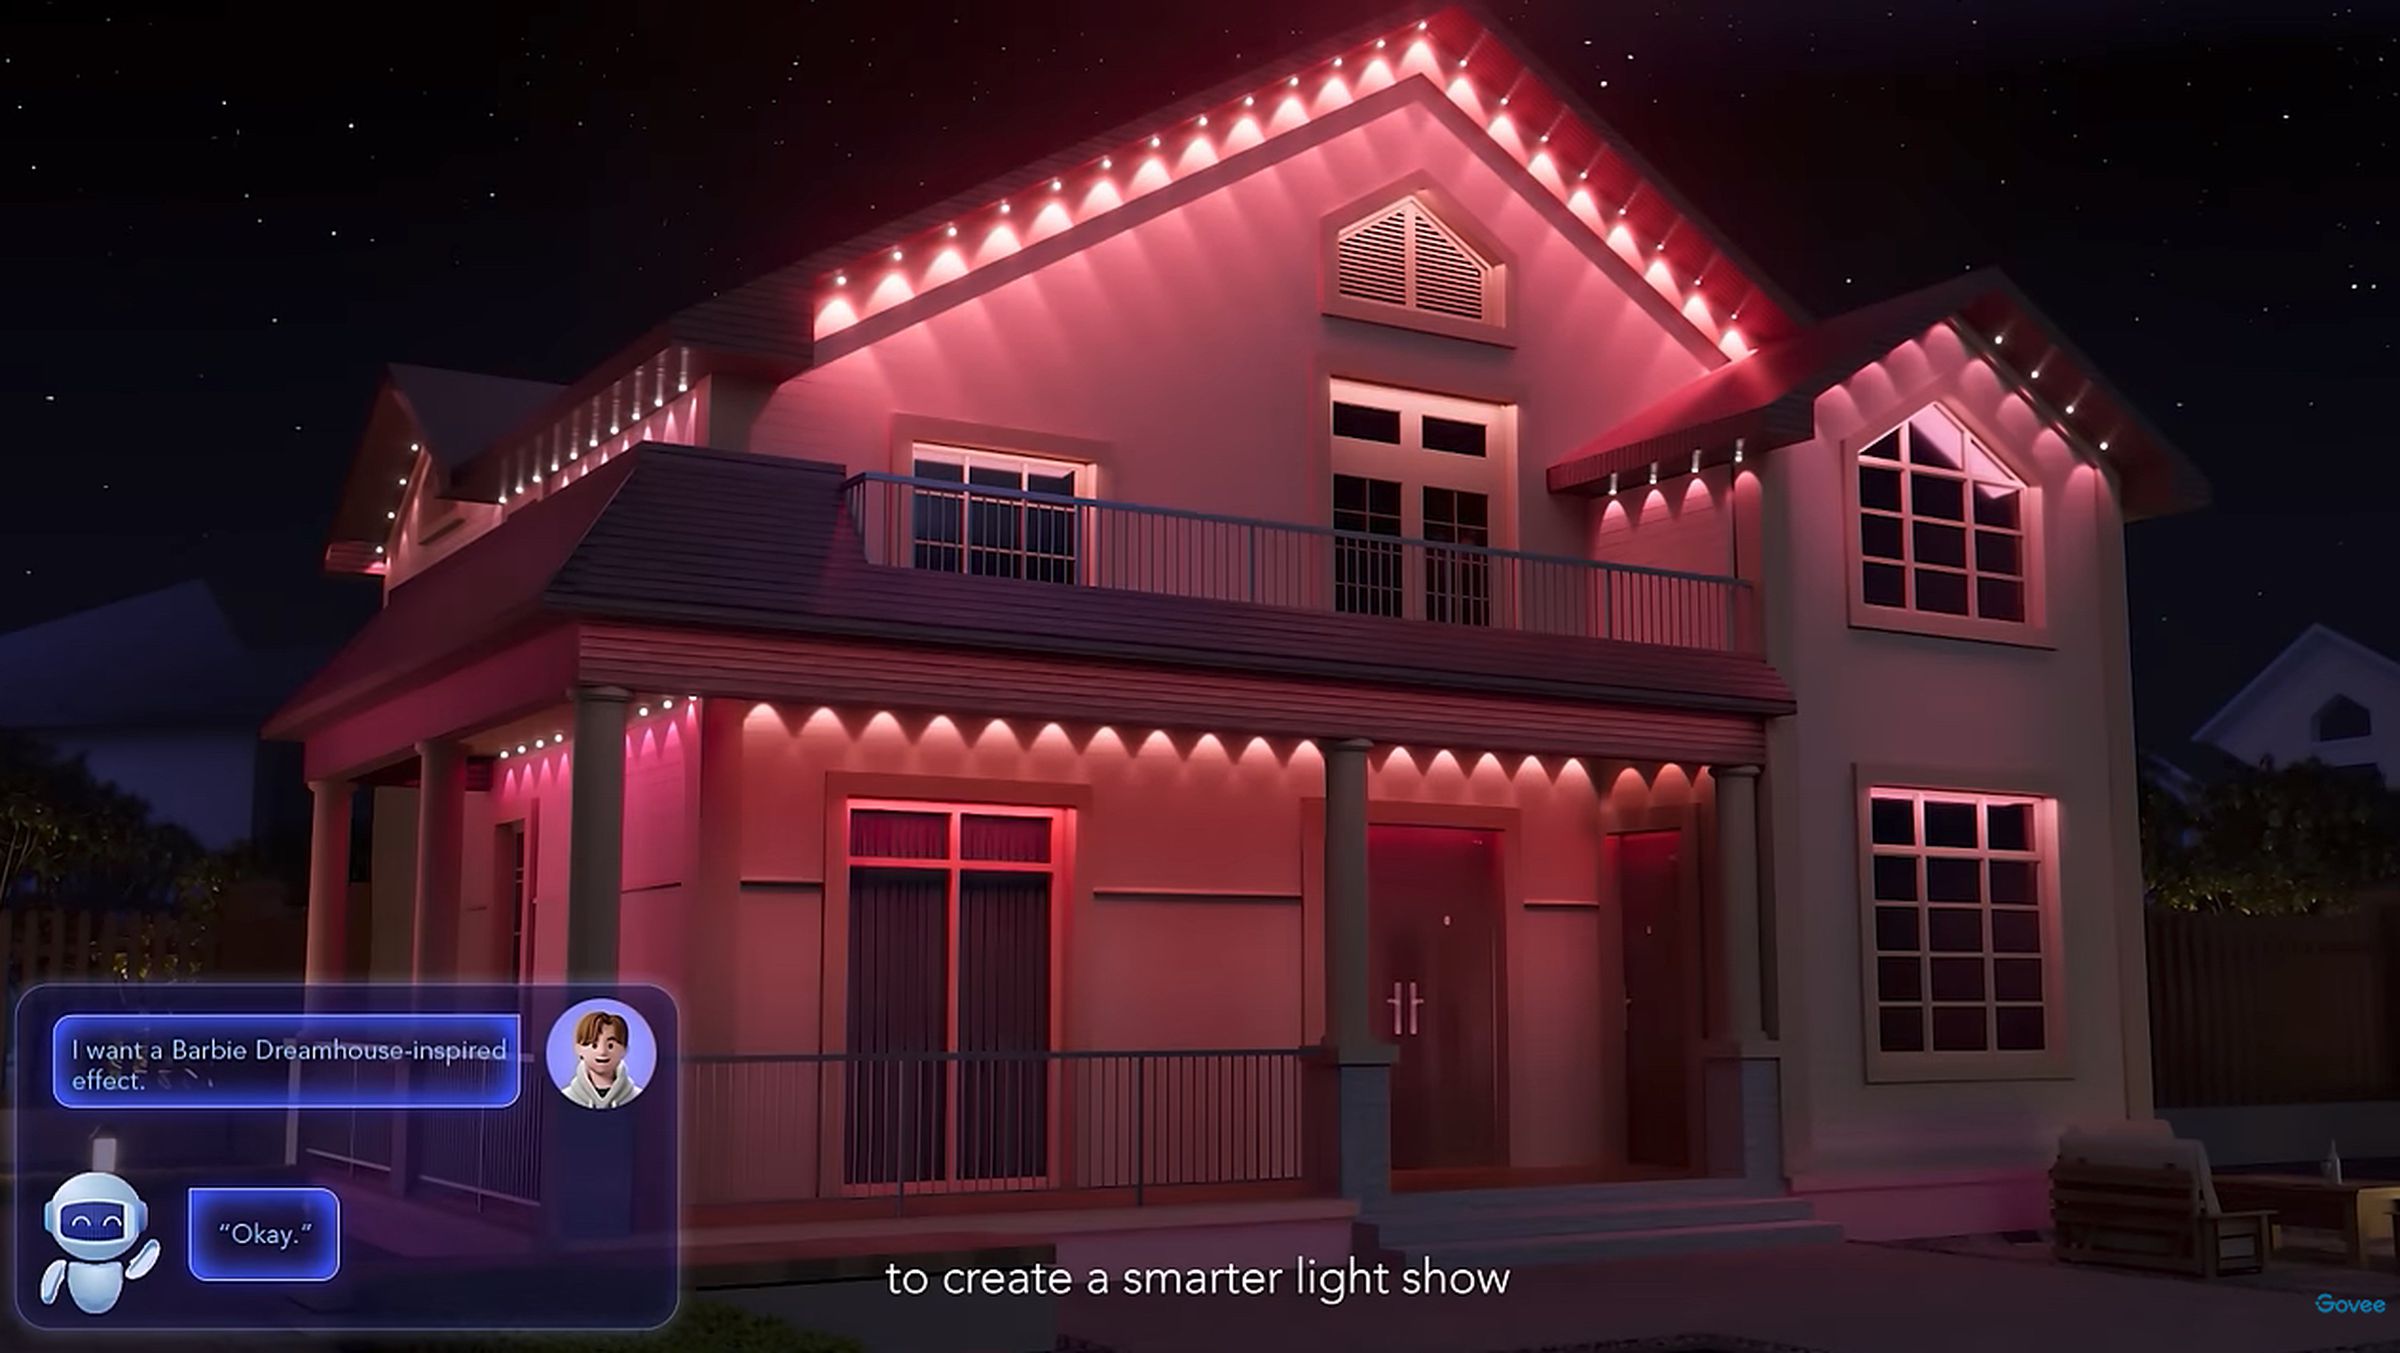 You, too, can have that Barbie Dreamhouse look thanks to generative AI.